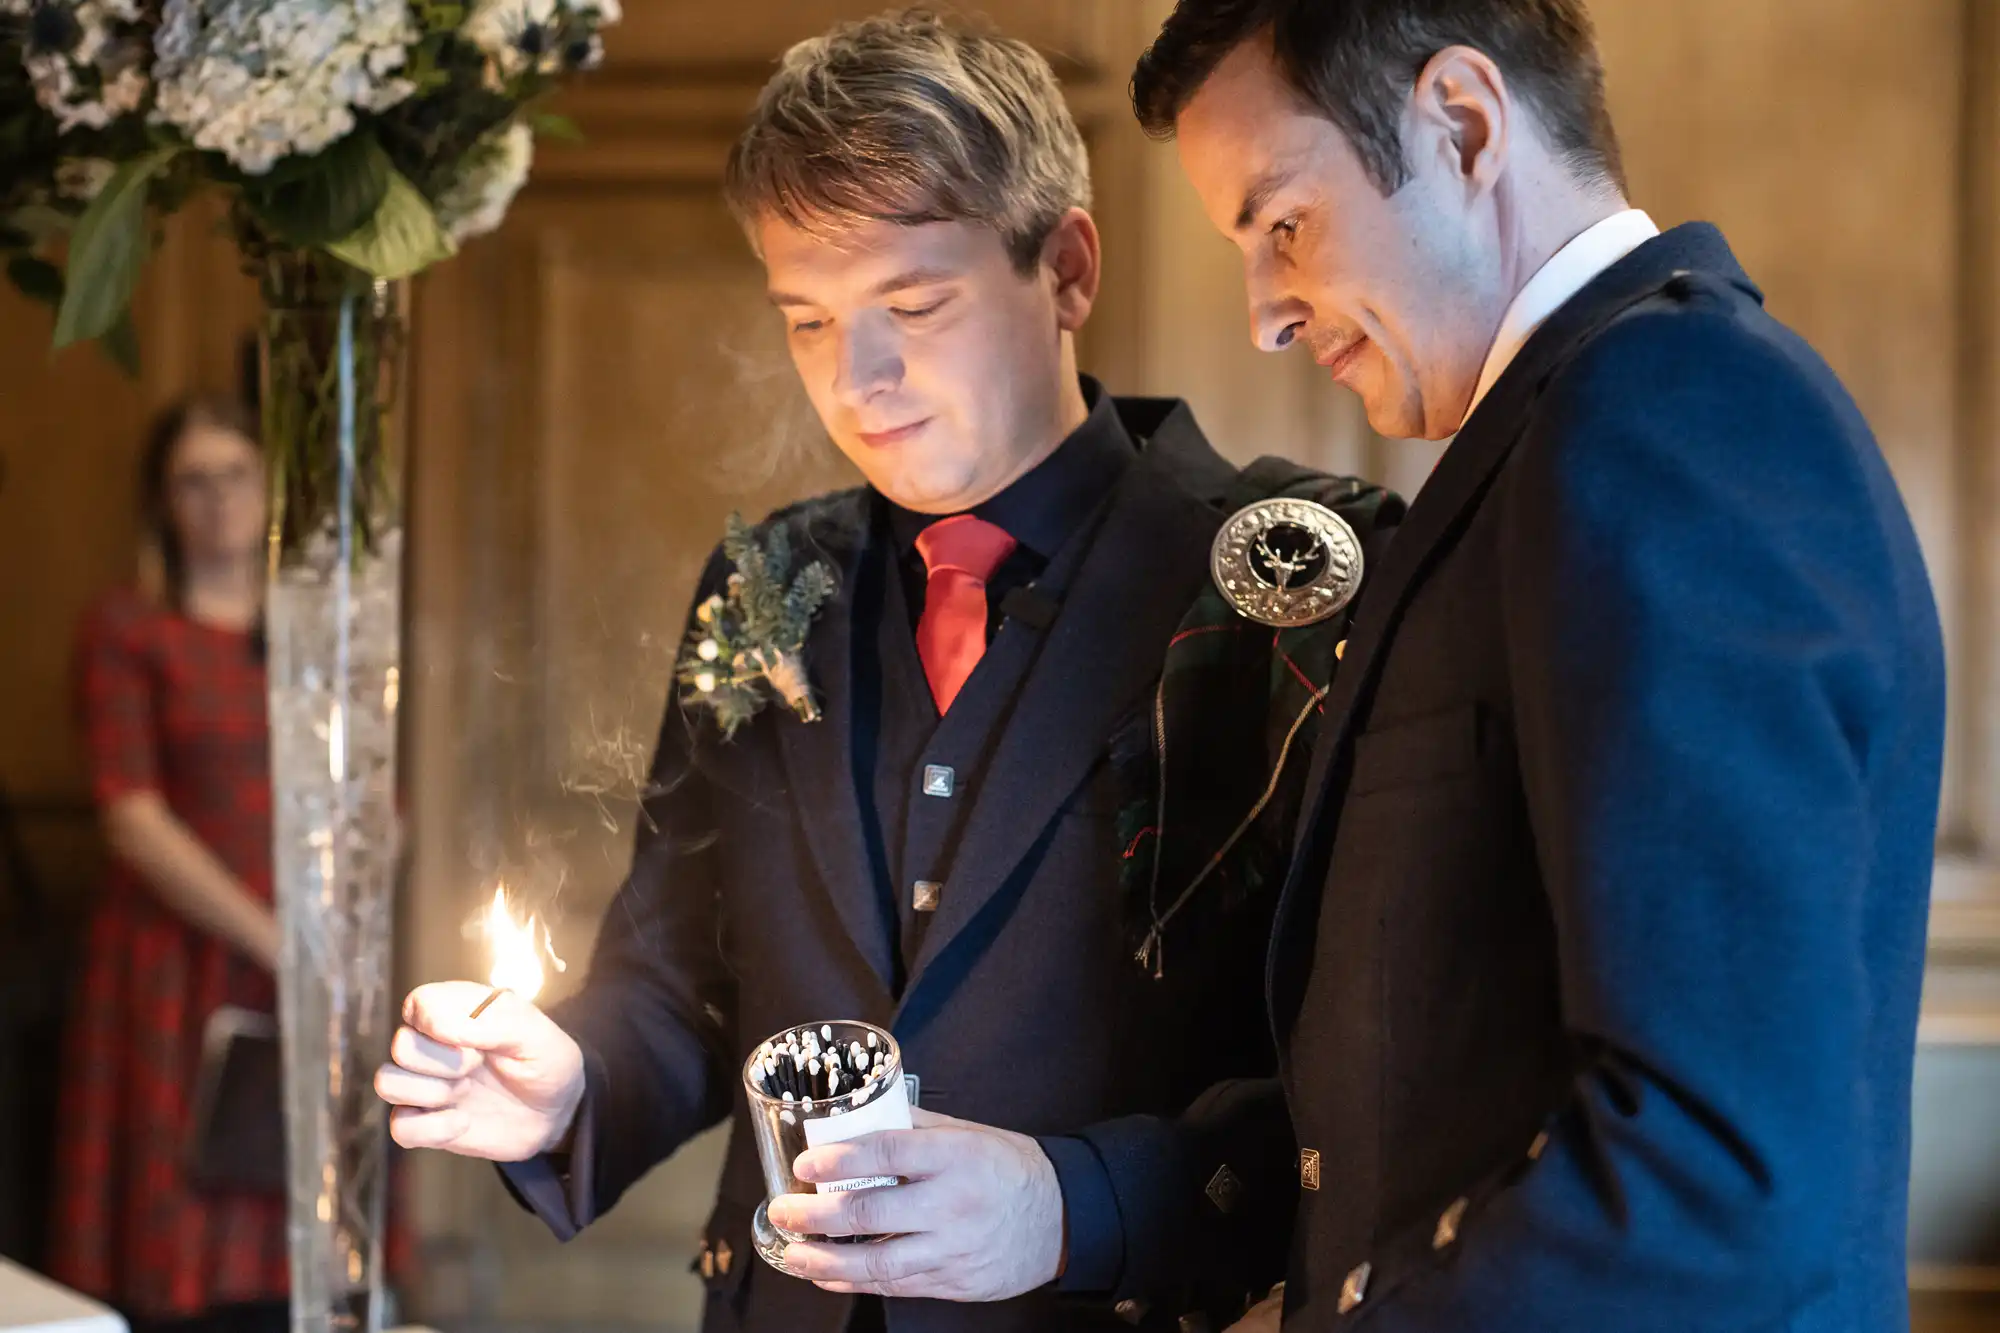 Two men stand together, one lighting a candle while the other watches closely. They are dressed formally, with kilts and jackets, in a warmly lit indoor setting.